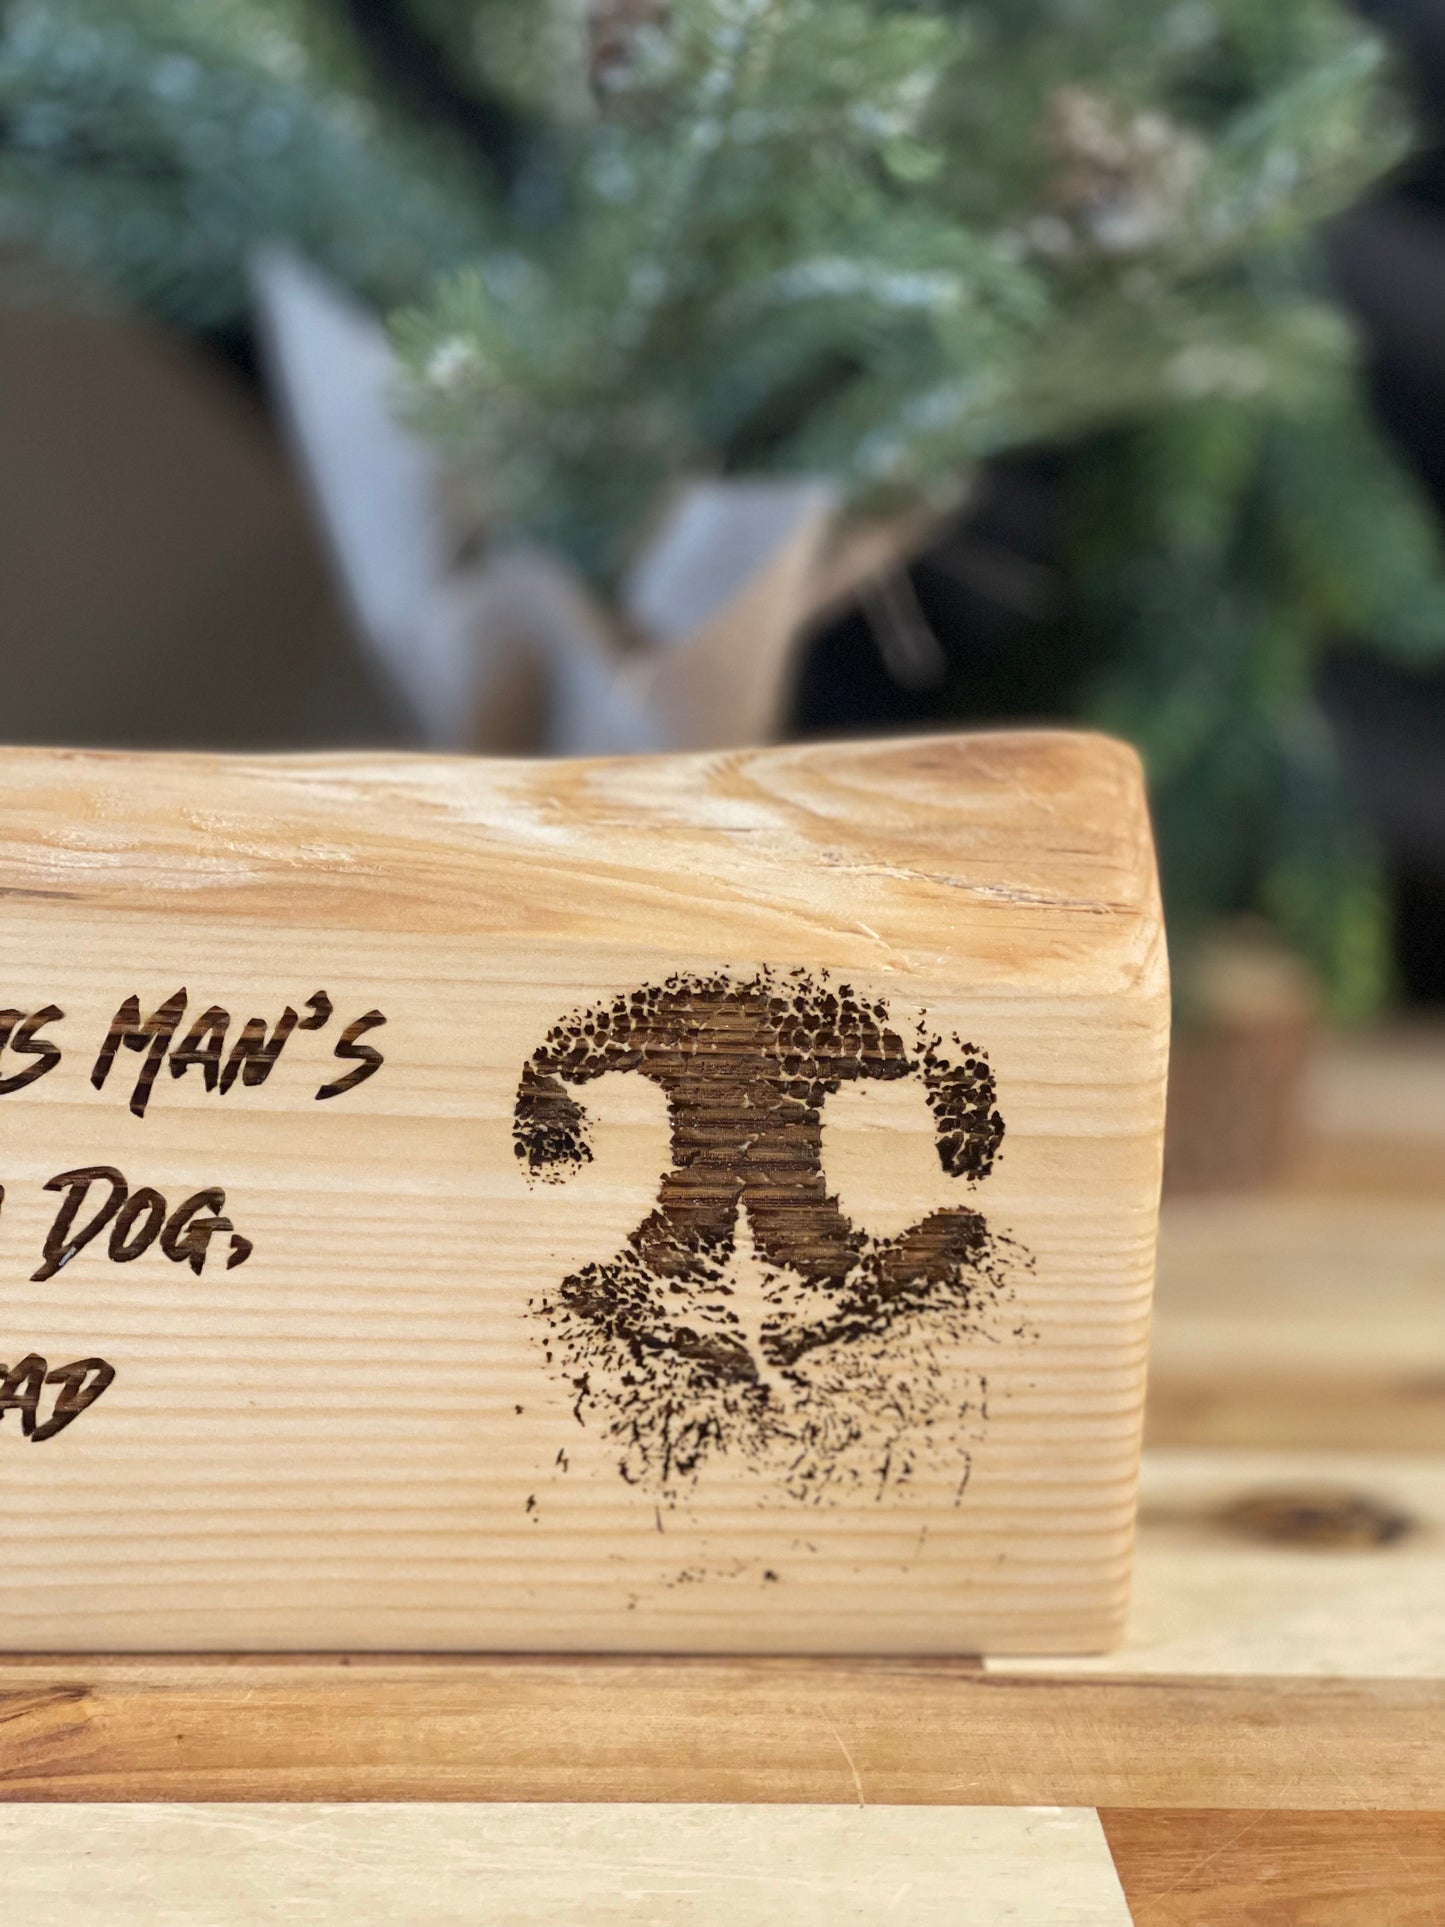 Too dark to read - Wood Engraved Decor